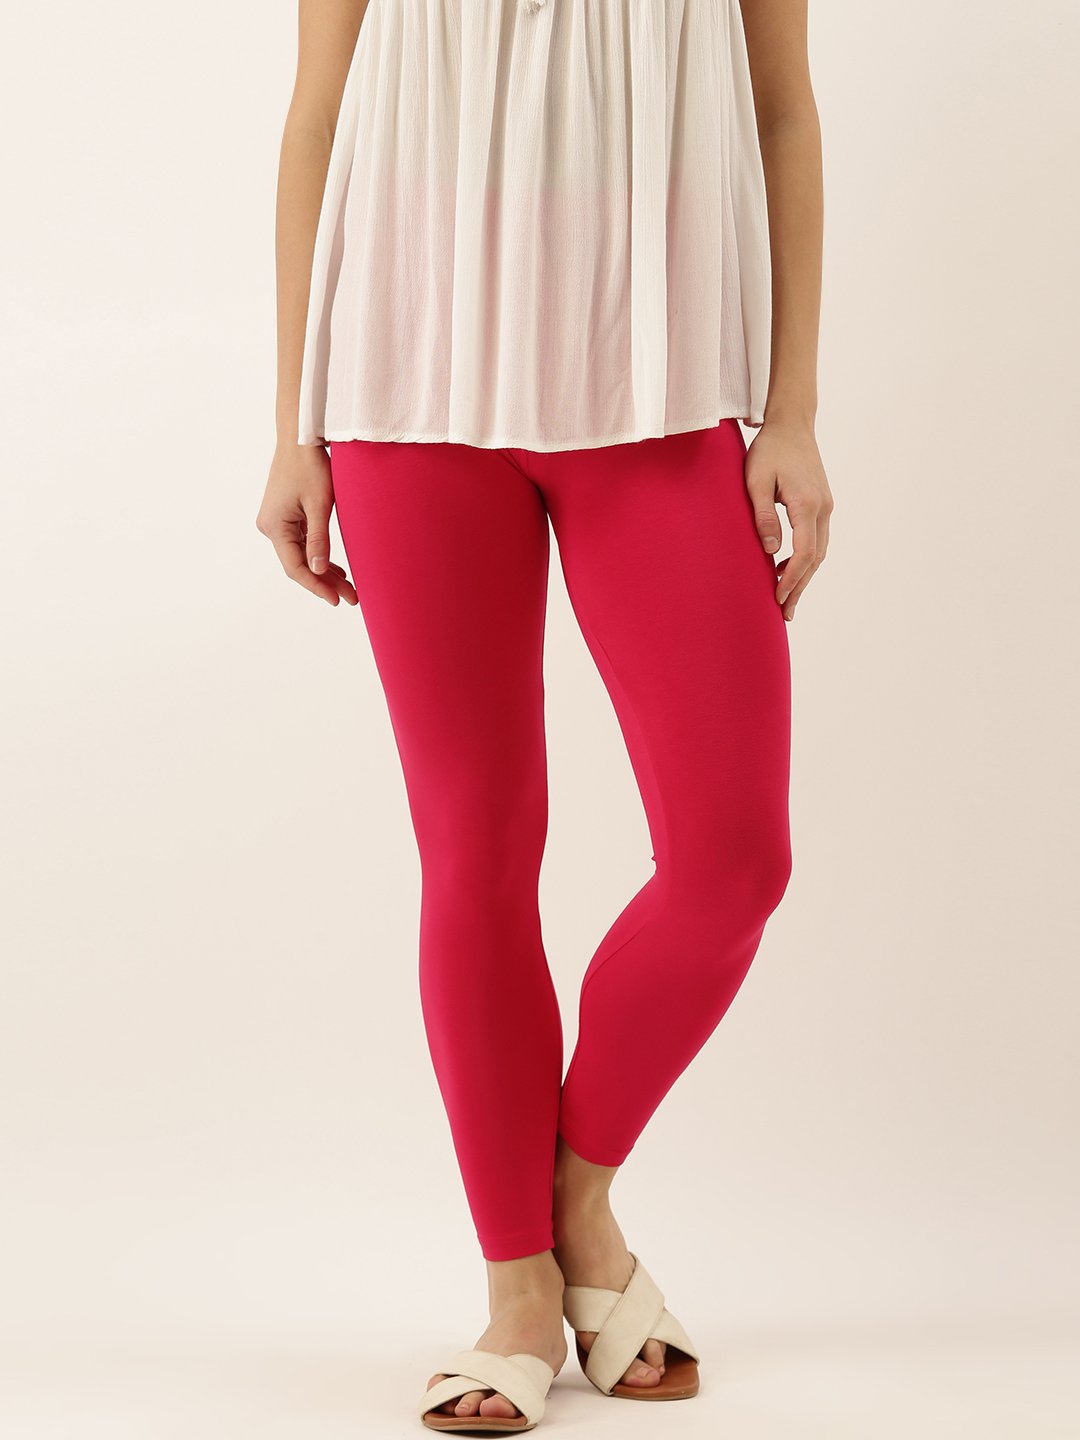 Buy Red Leggings for Women by Go Colors Online | Ajio.com